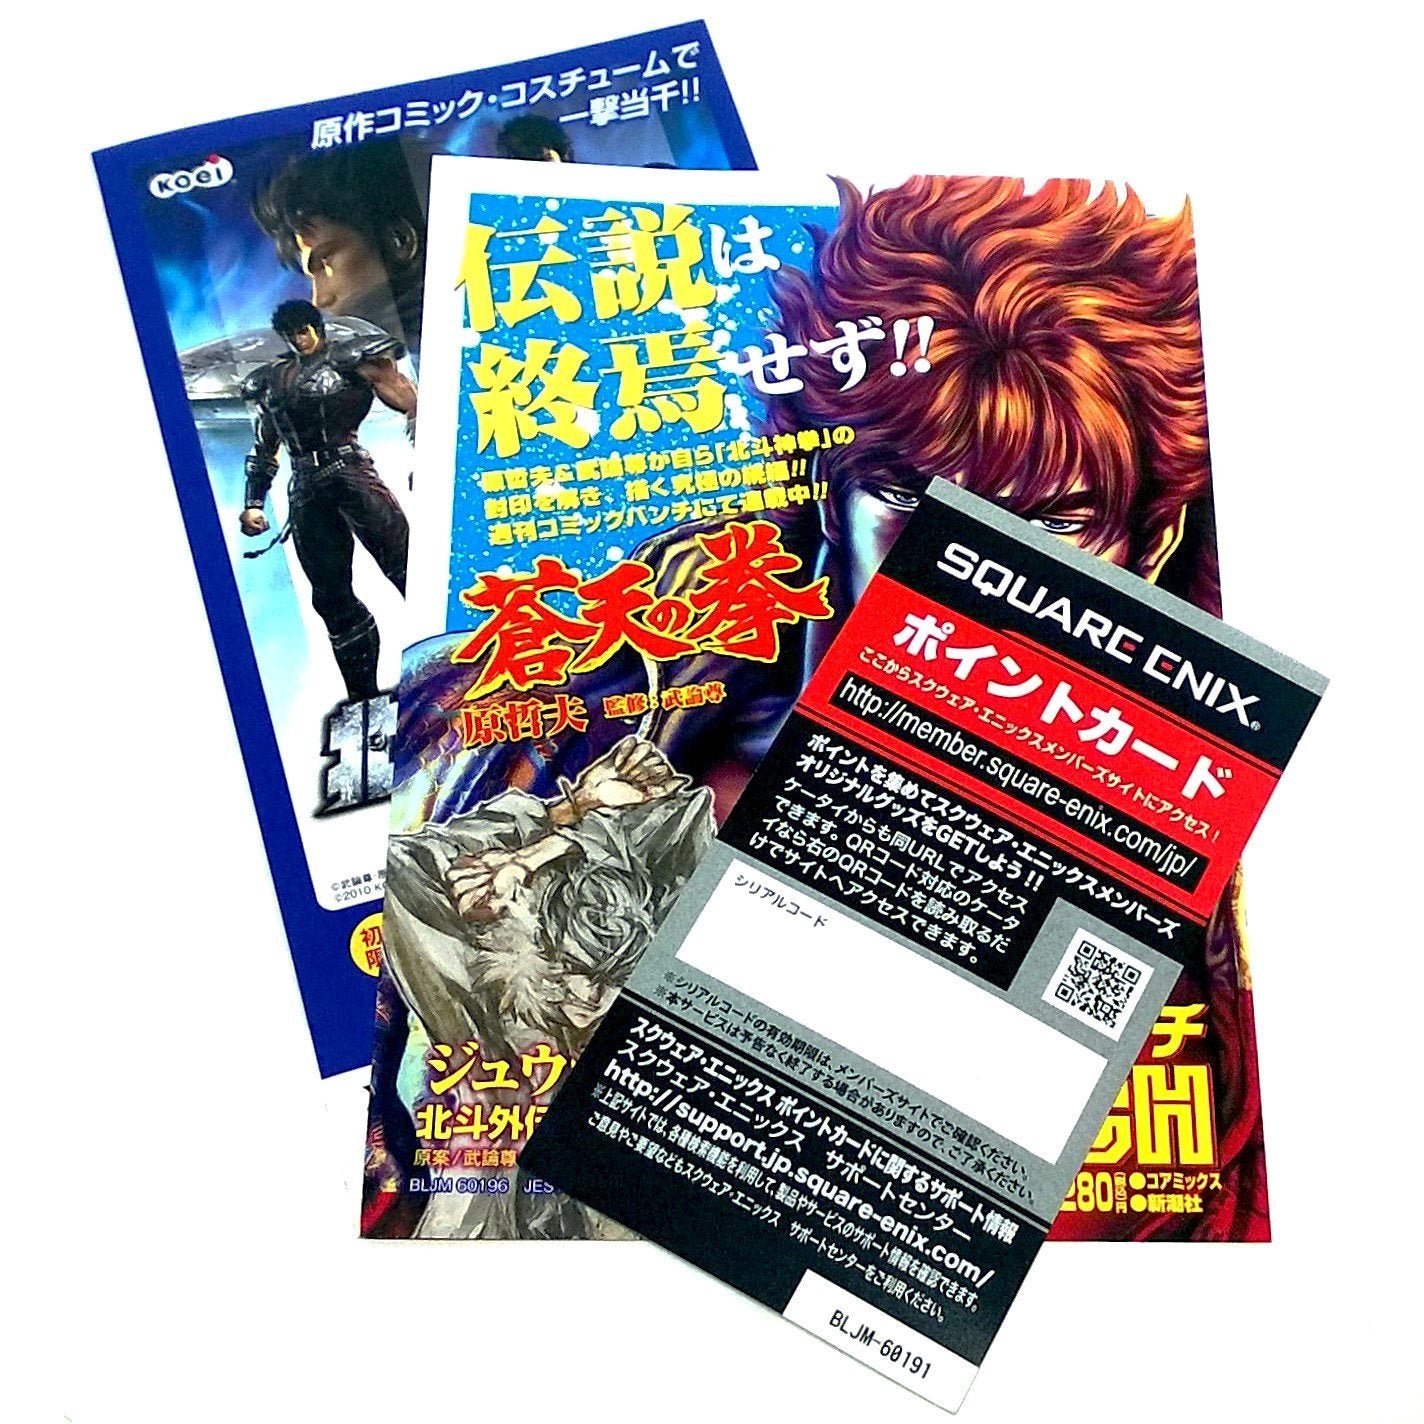 Hokuto Musou for PlayStation 3 (import) - Promo inserts